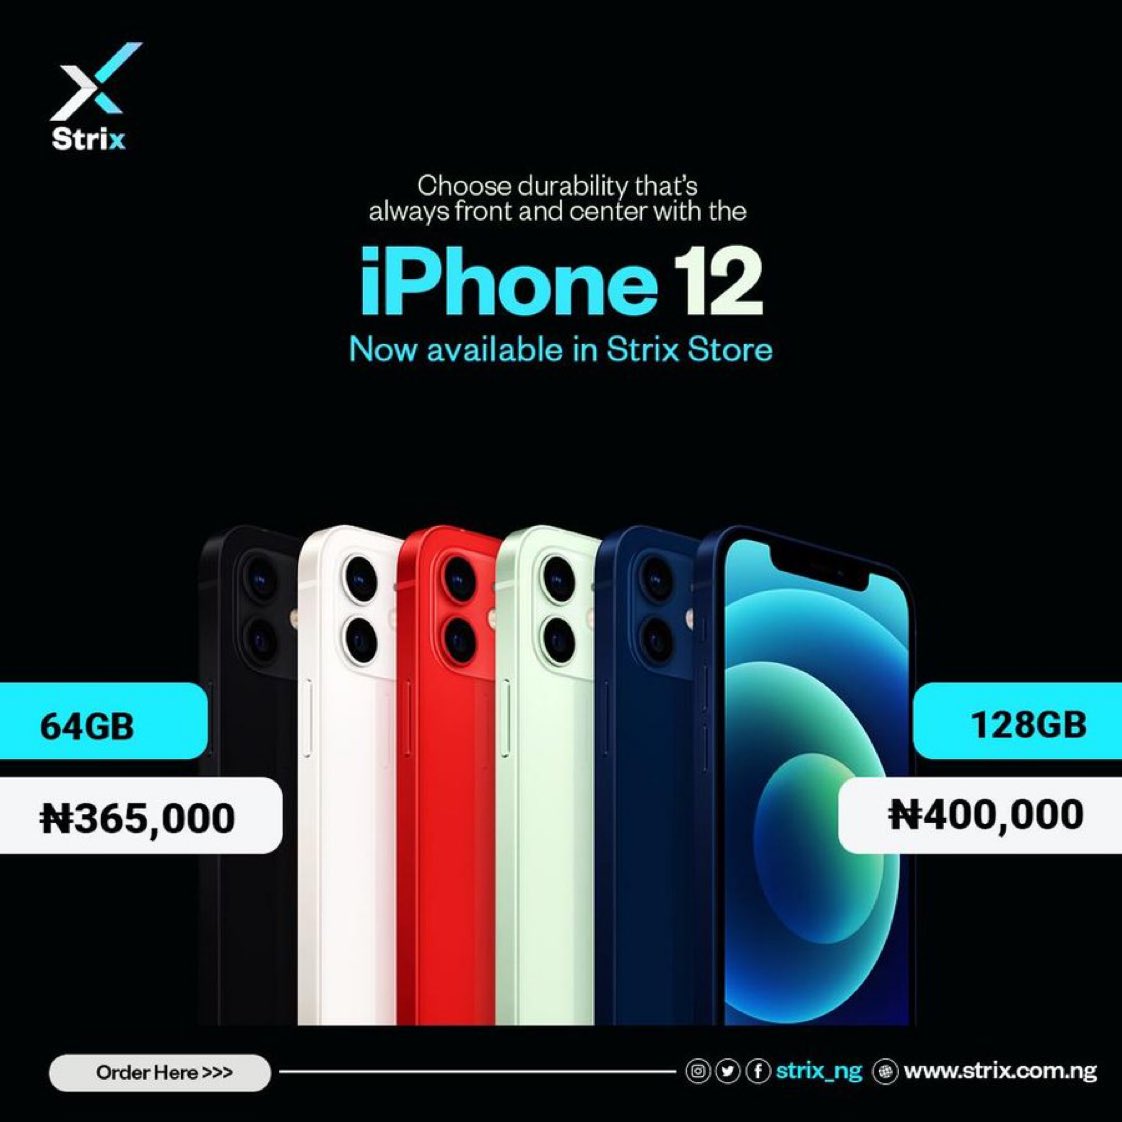 Get your quality gadgets from the surest plug online @Strix_ng for a very affordable price.

Visit strix.com.ng to order or walk into any of their stores 🏬 in Lagos , Abuja or Enugu 

📍 Felicity Mall, Idado, Lekki. Lagos 
#ShopStrix